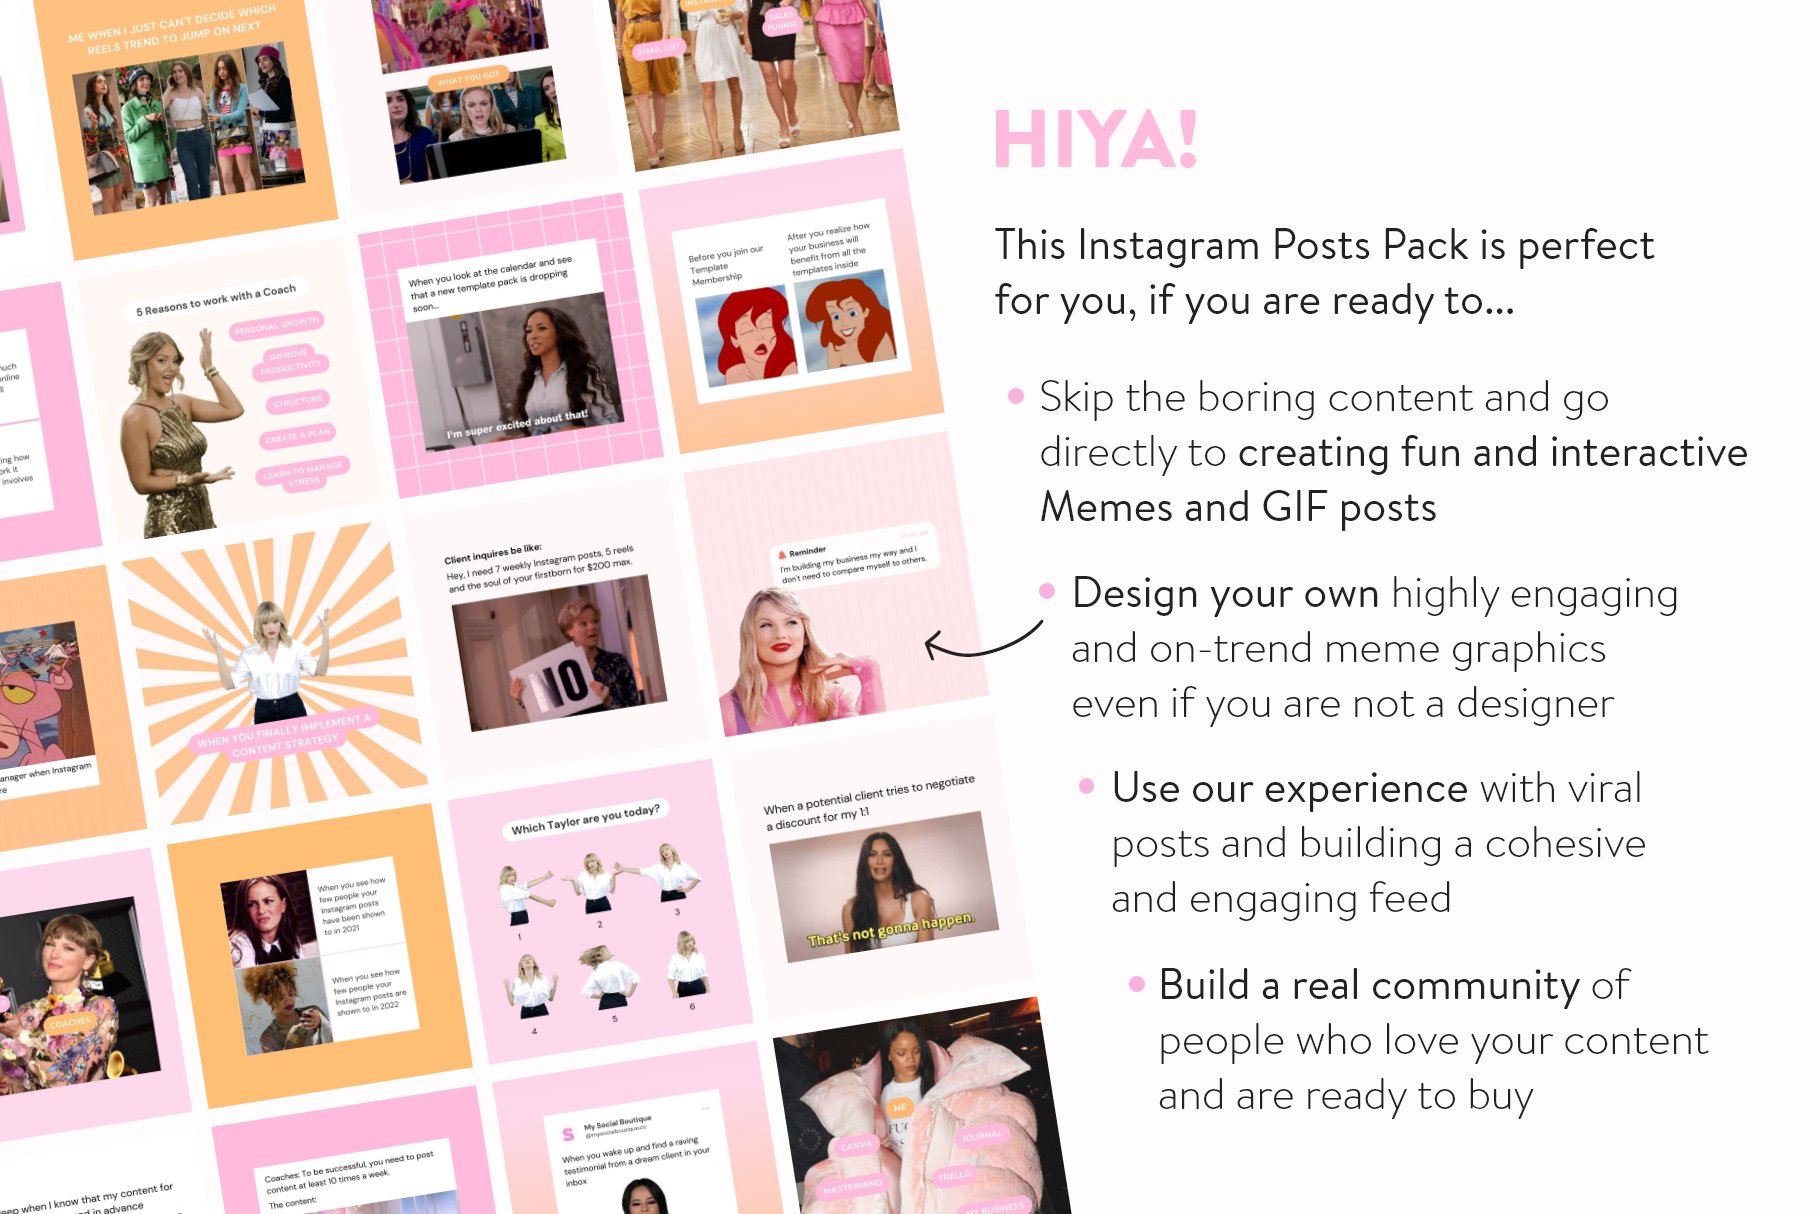 This instagram pack is perfect for you.